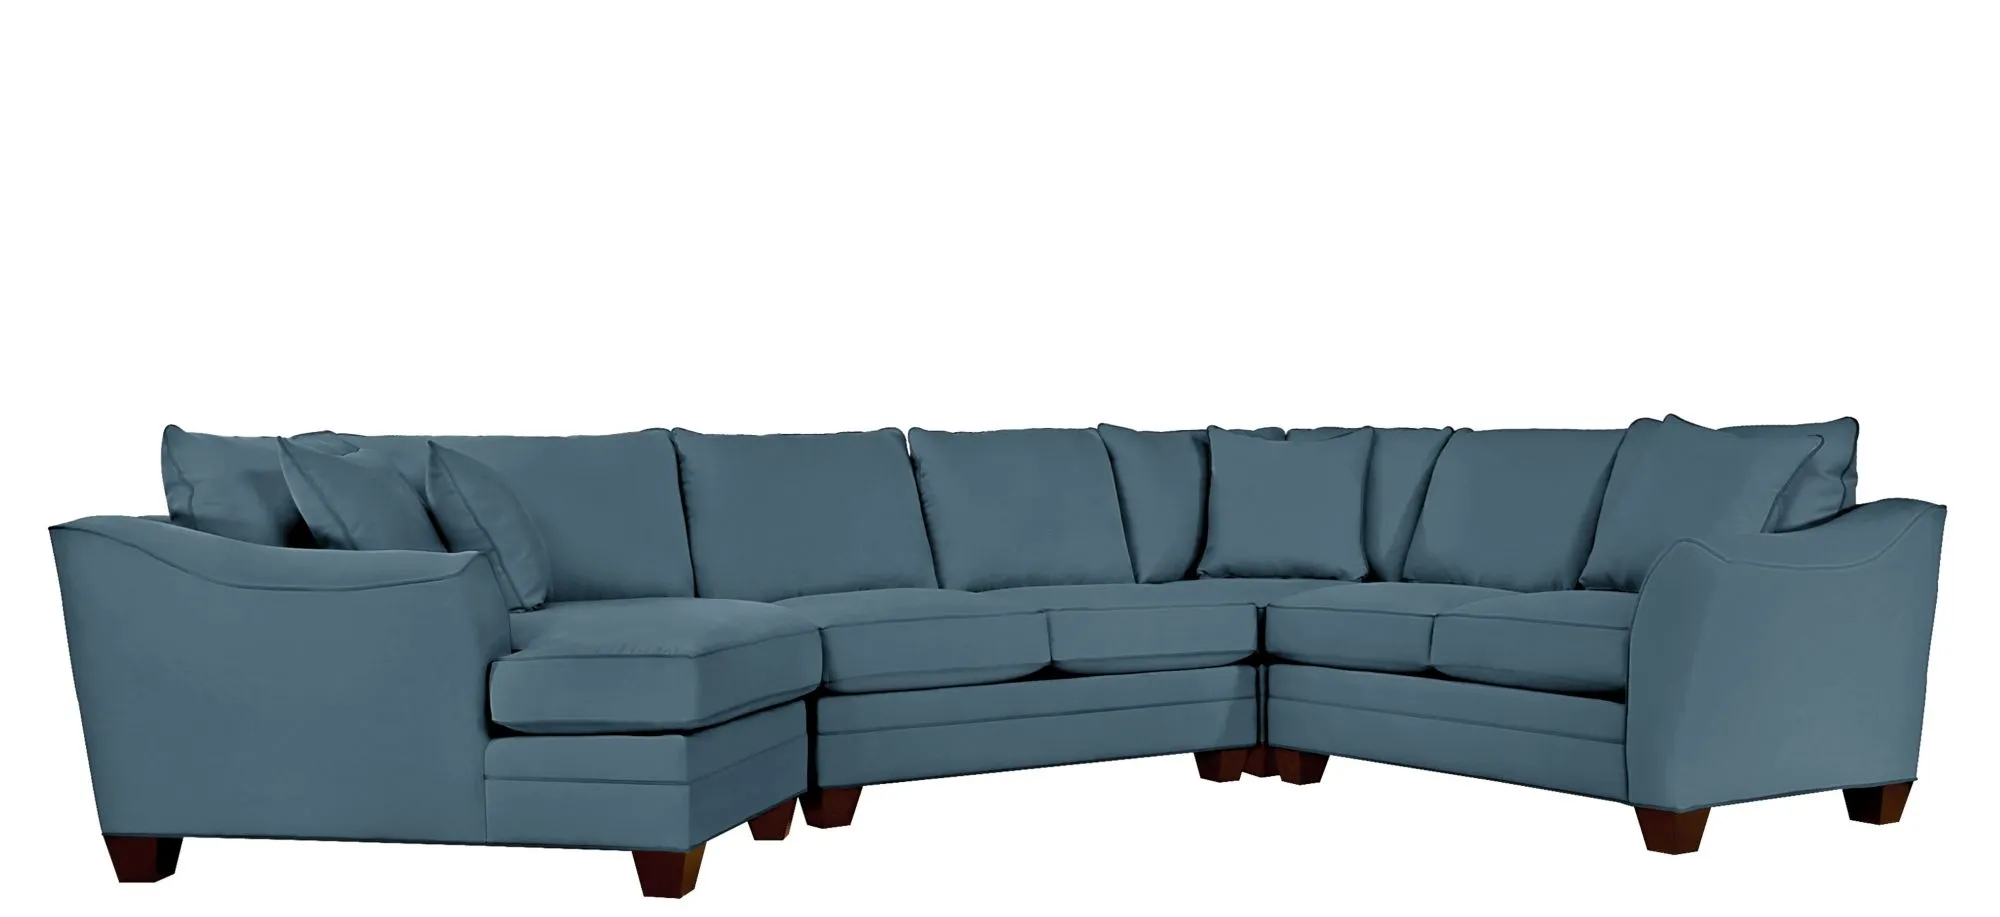 Foresthill 4-pc. Left Hand Cuddler with Loveseat Sectional Sofa in Suede So Soft Indigo by H.M. Richards